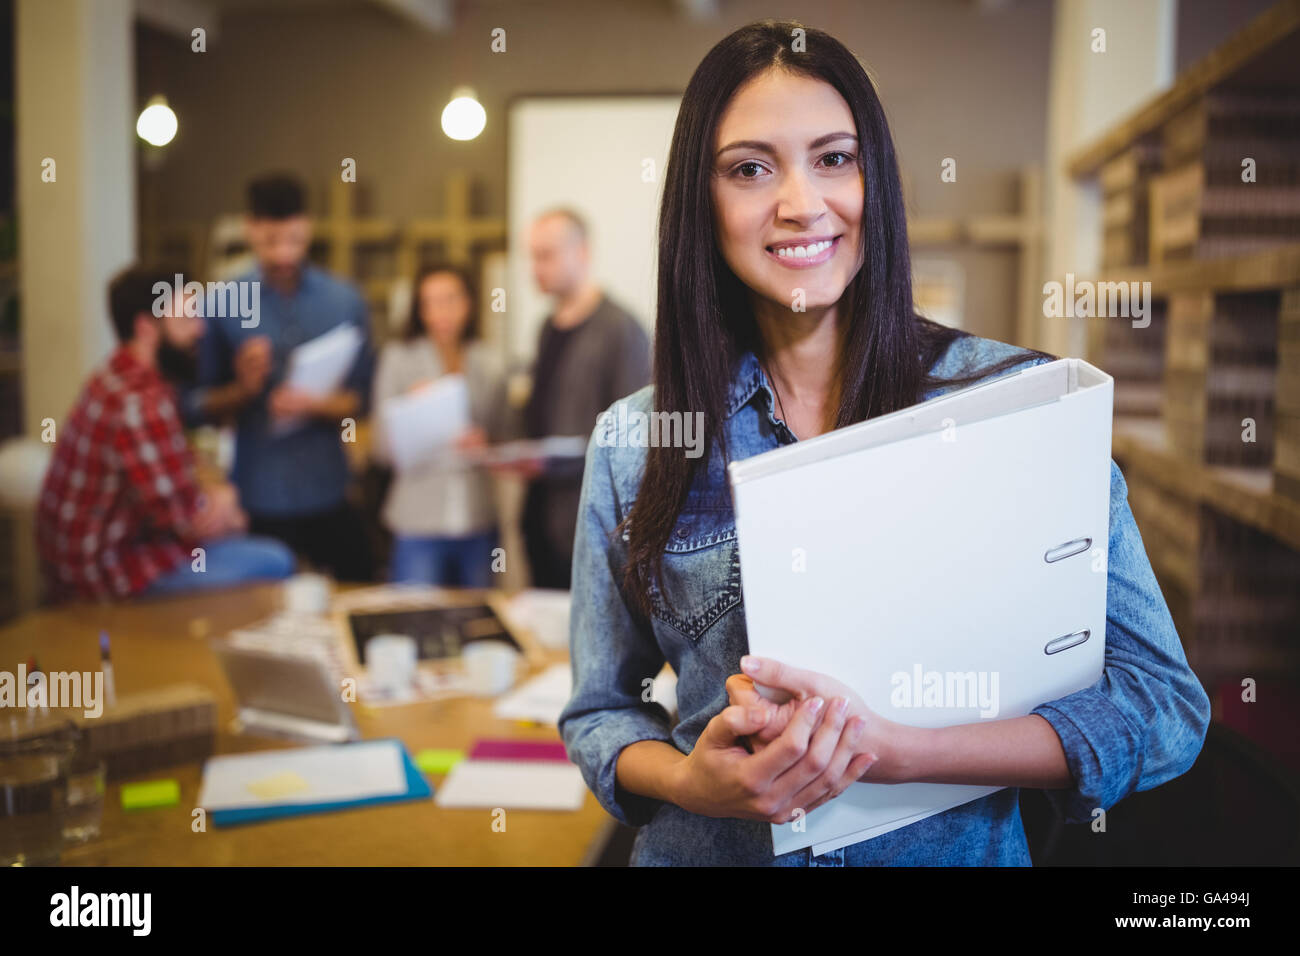 Confident businesswoman holding file while colleagues in background Stock Photo